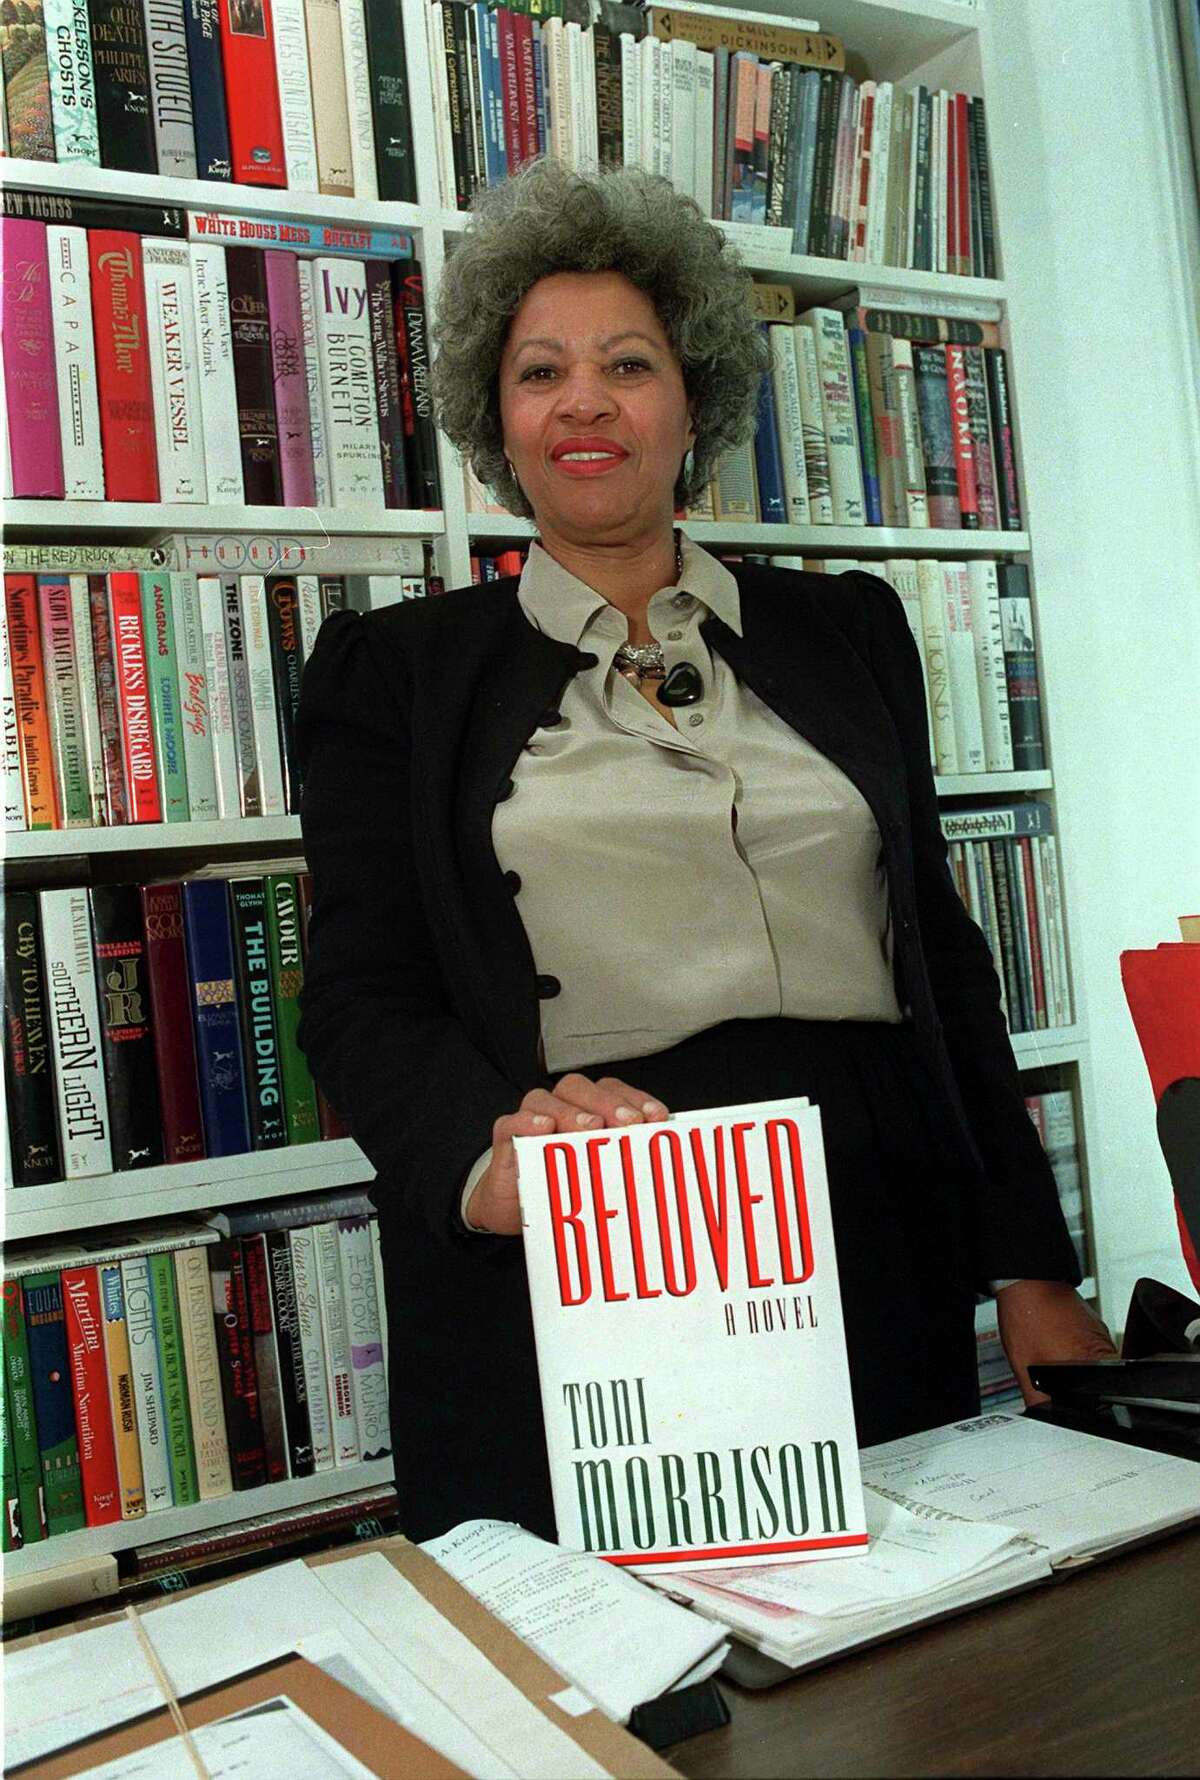 In this September 1987 file photo, author Toni Morrison poses with a copy of her book "Beloved" in New York.